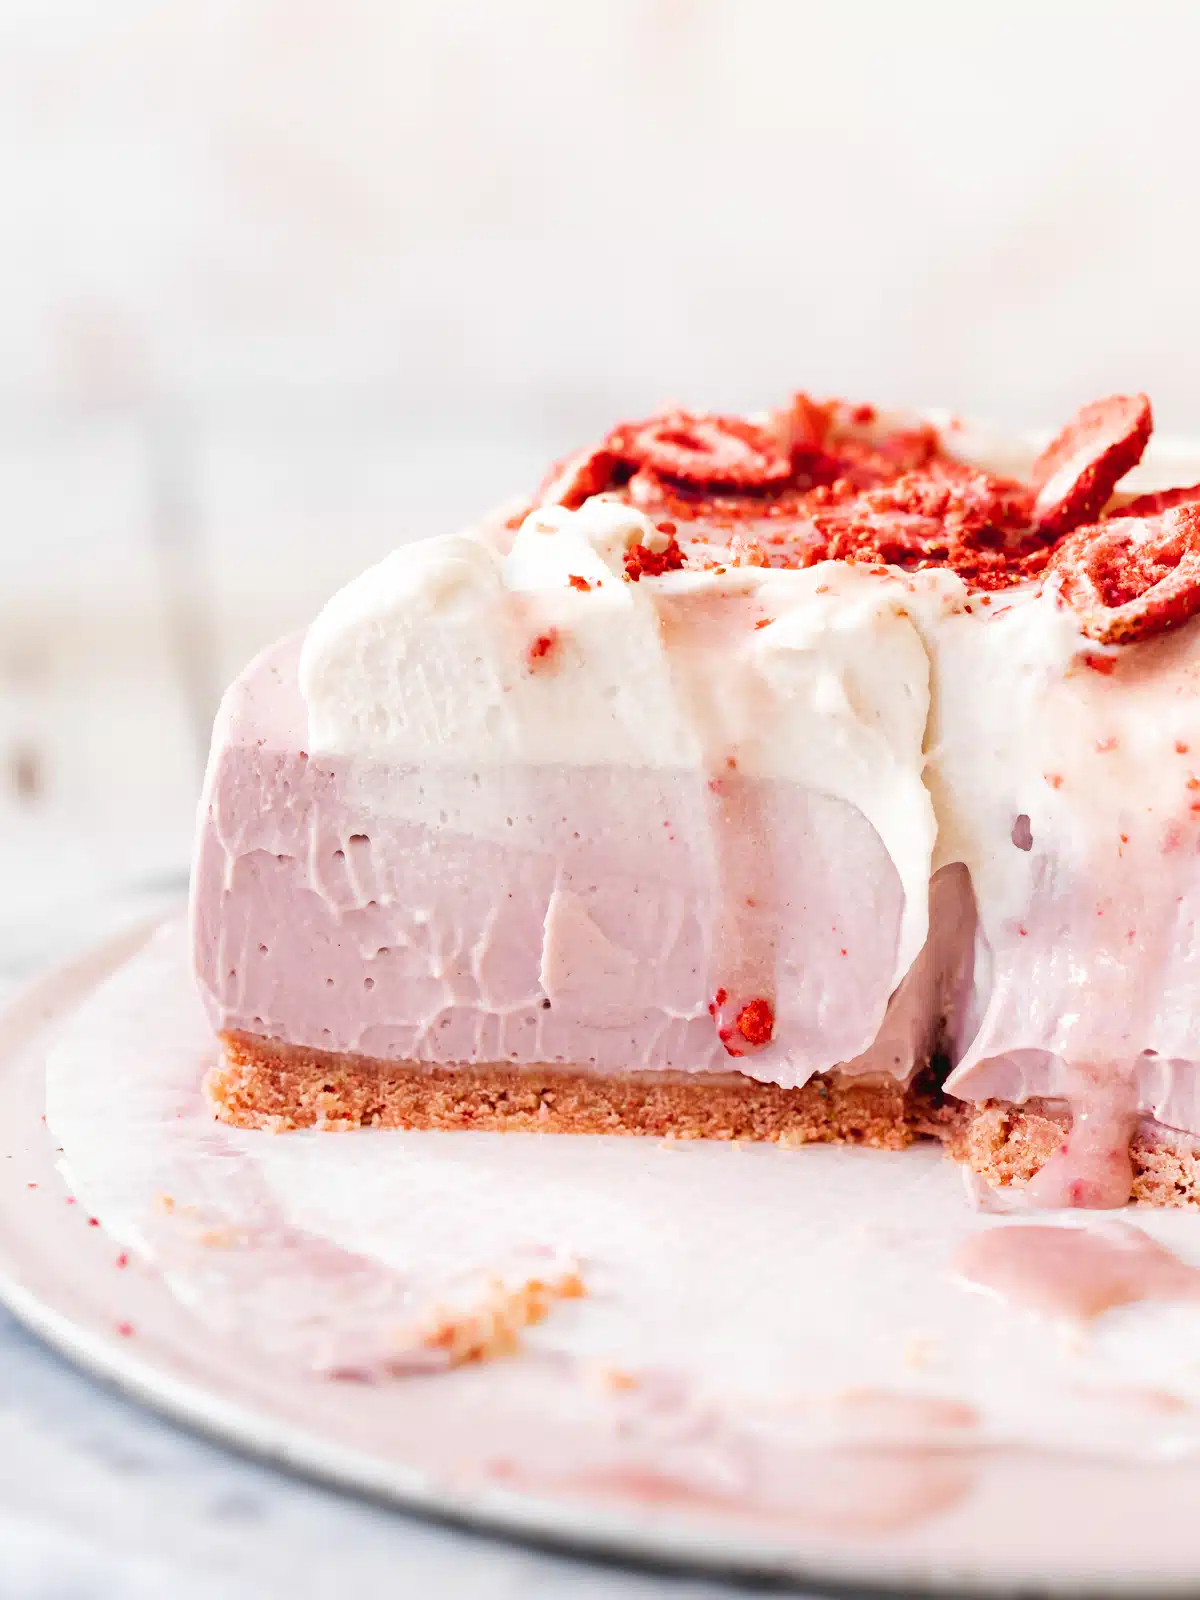 strawberry cheesecake with whipped dairy-free cream and freeze dried berries on top, with slices taken out of it showing the creamy consistency.